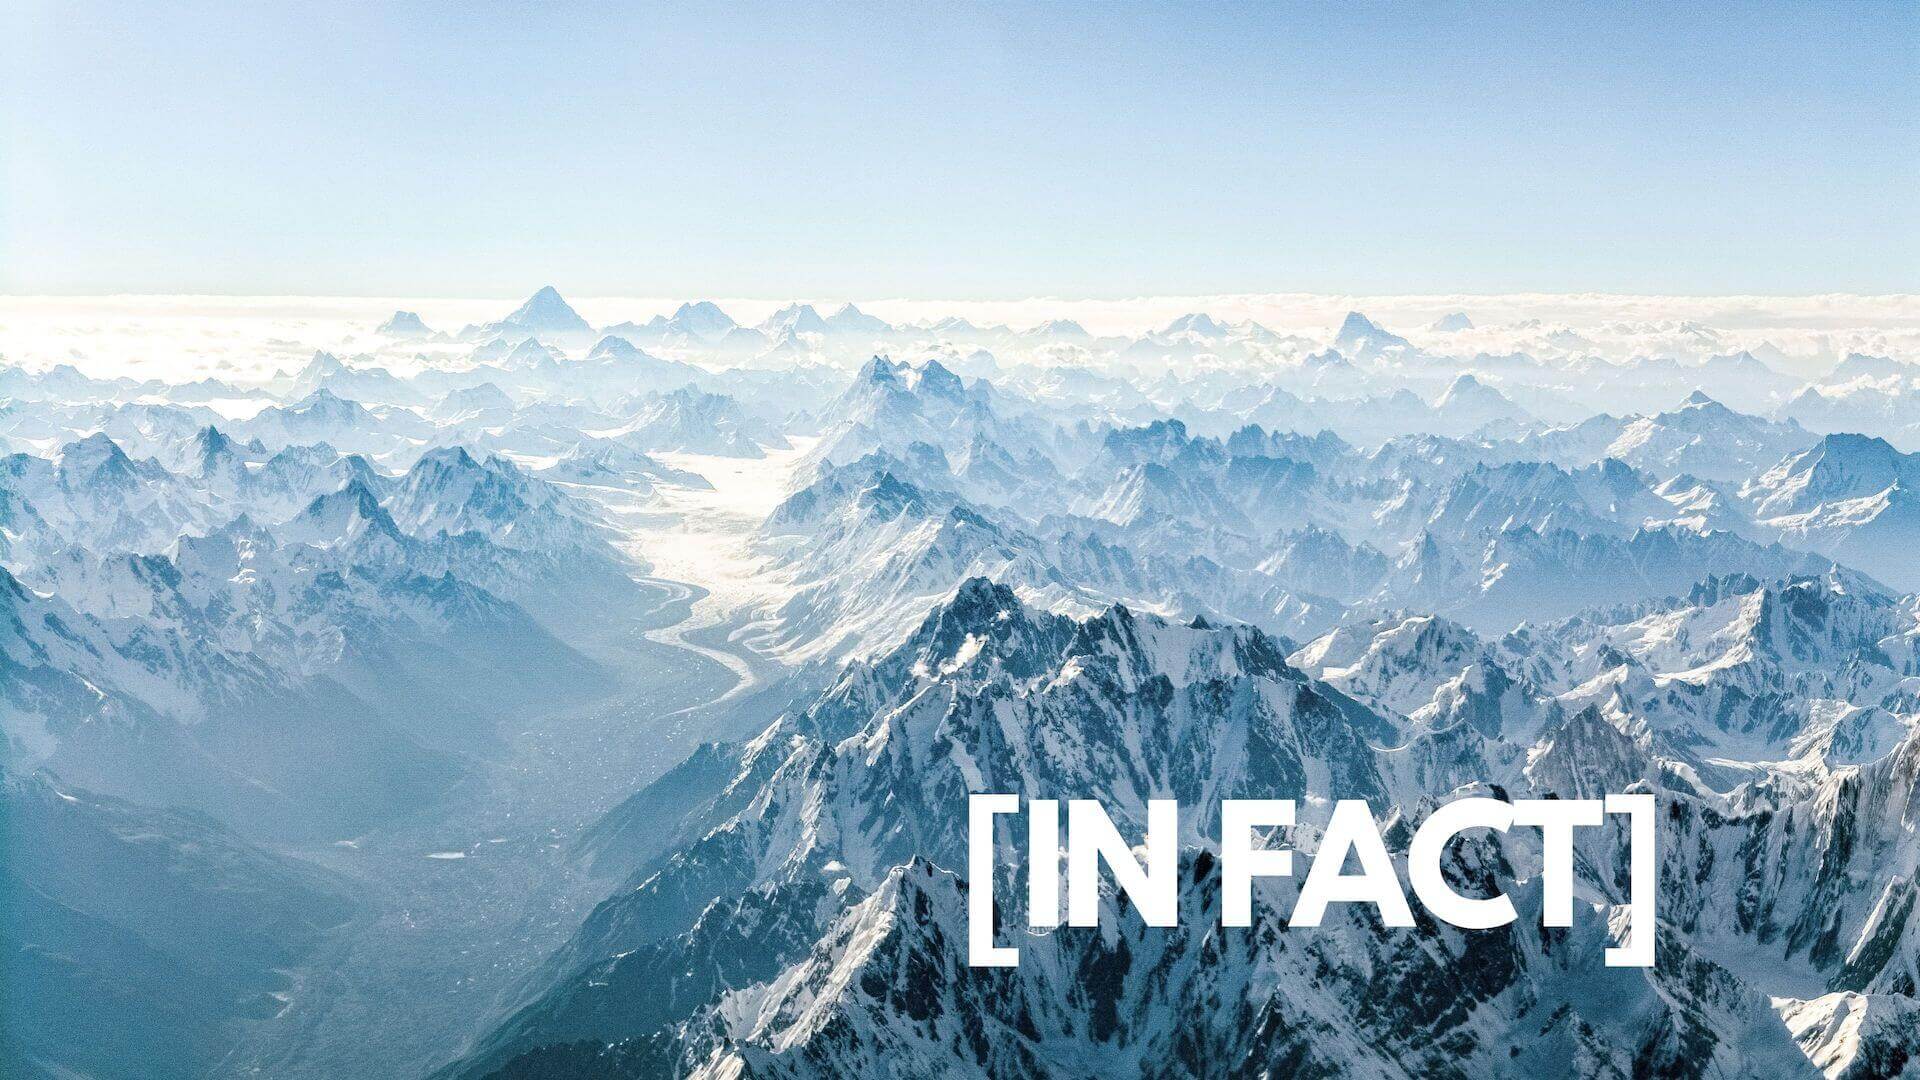 IN FACT, These are the Top 10 Highest Mountains in the World